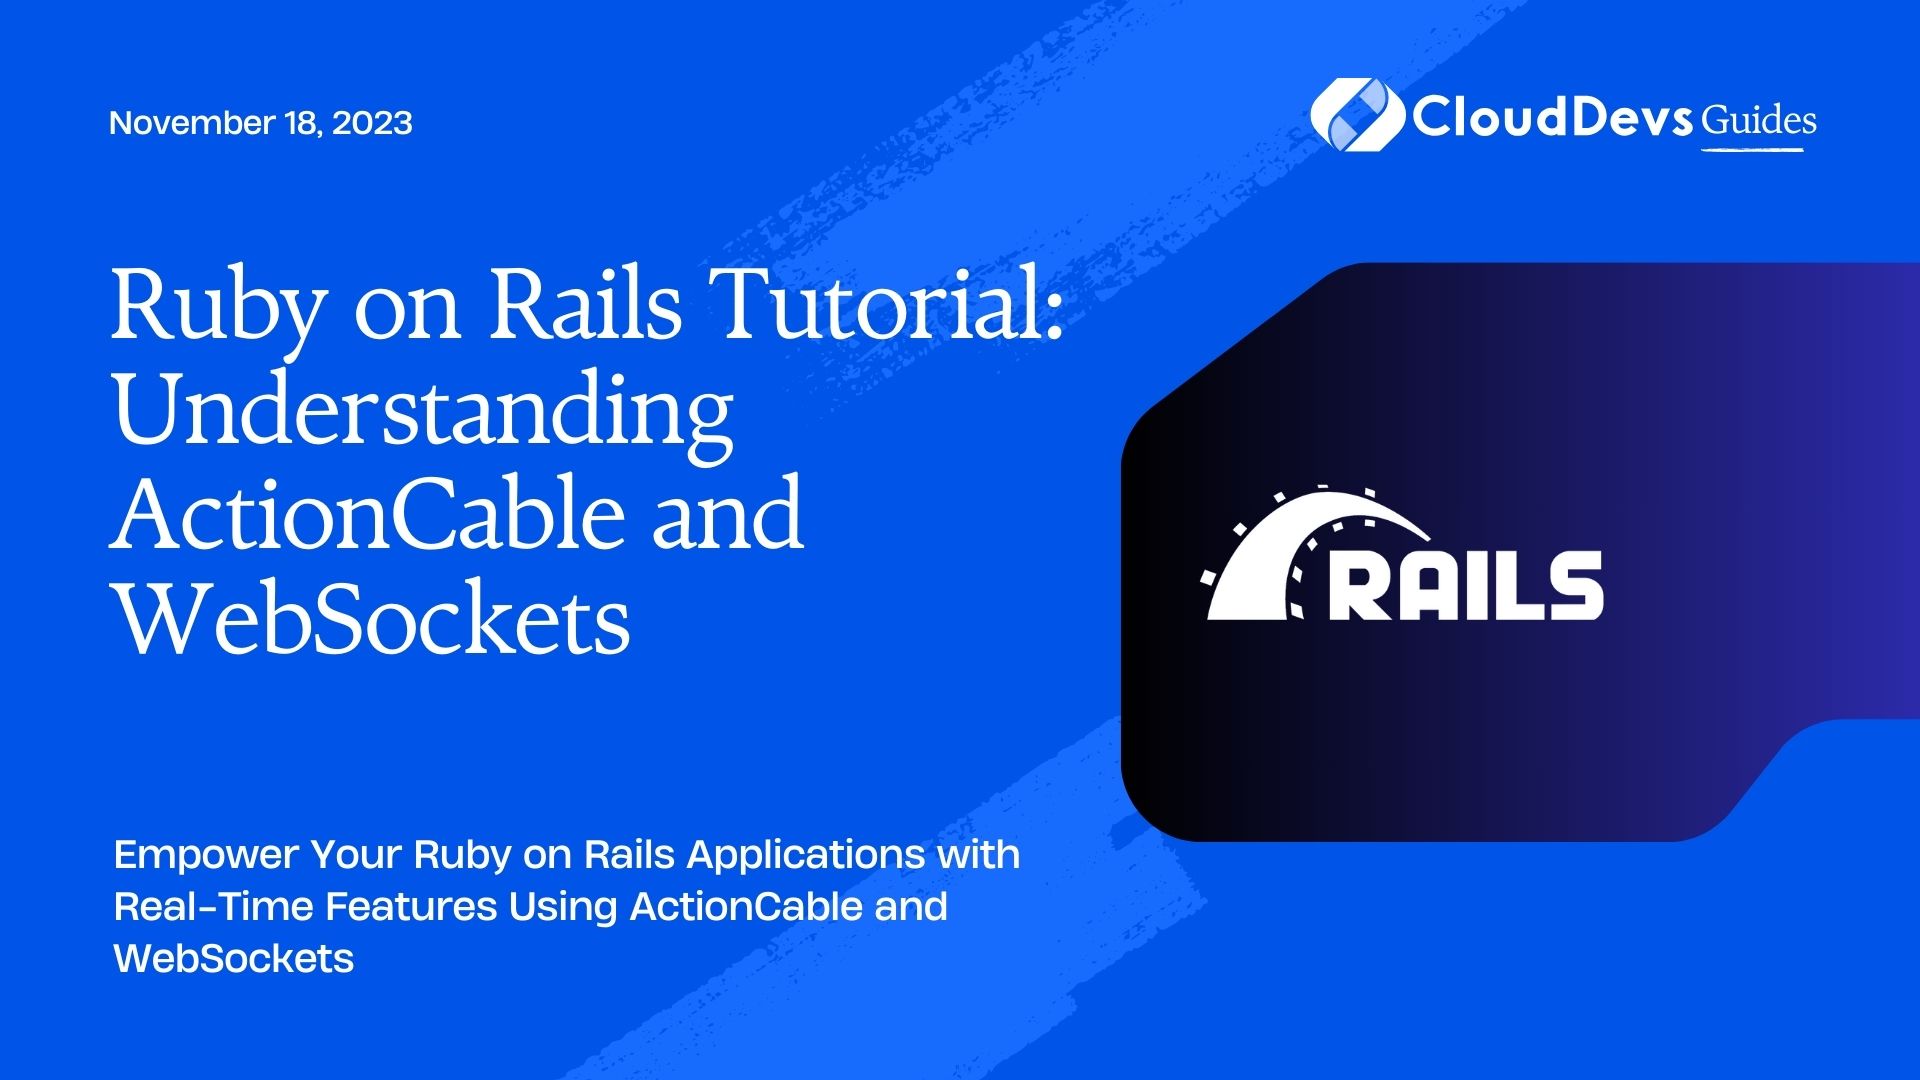 Ruby on Rails Tutorial: Understanding ActionCable and WebSockets